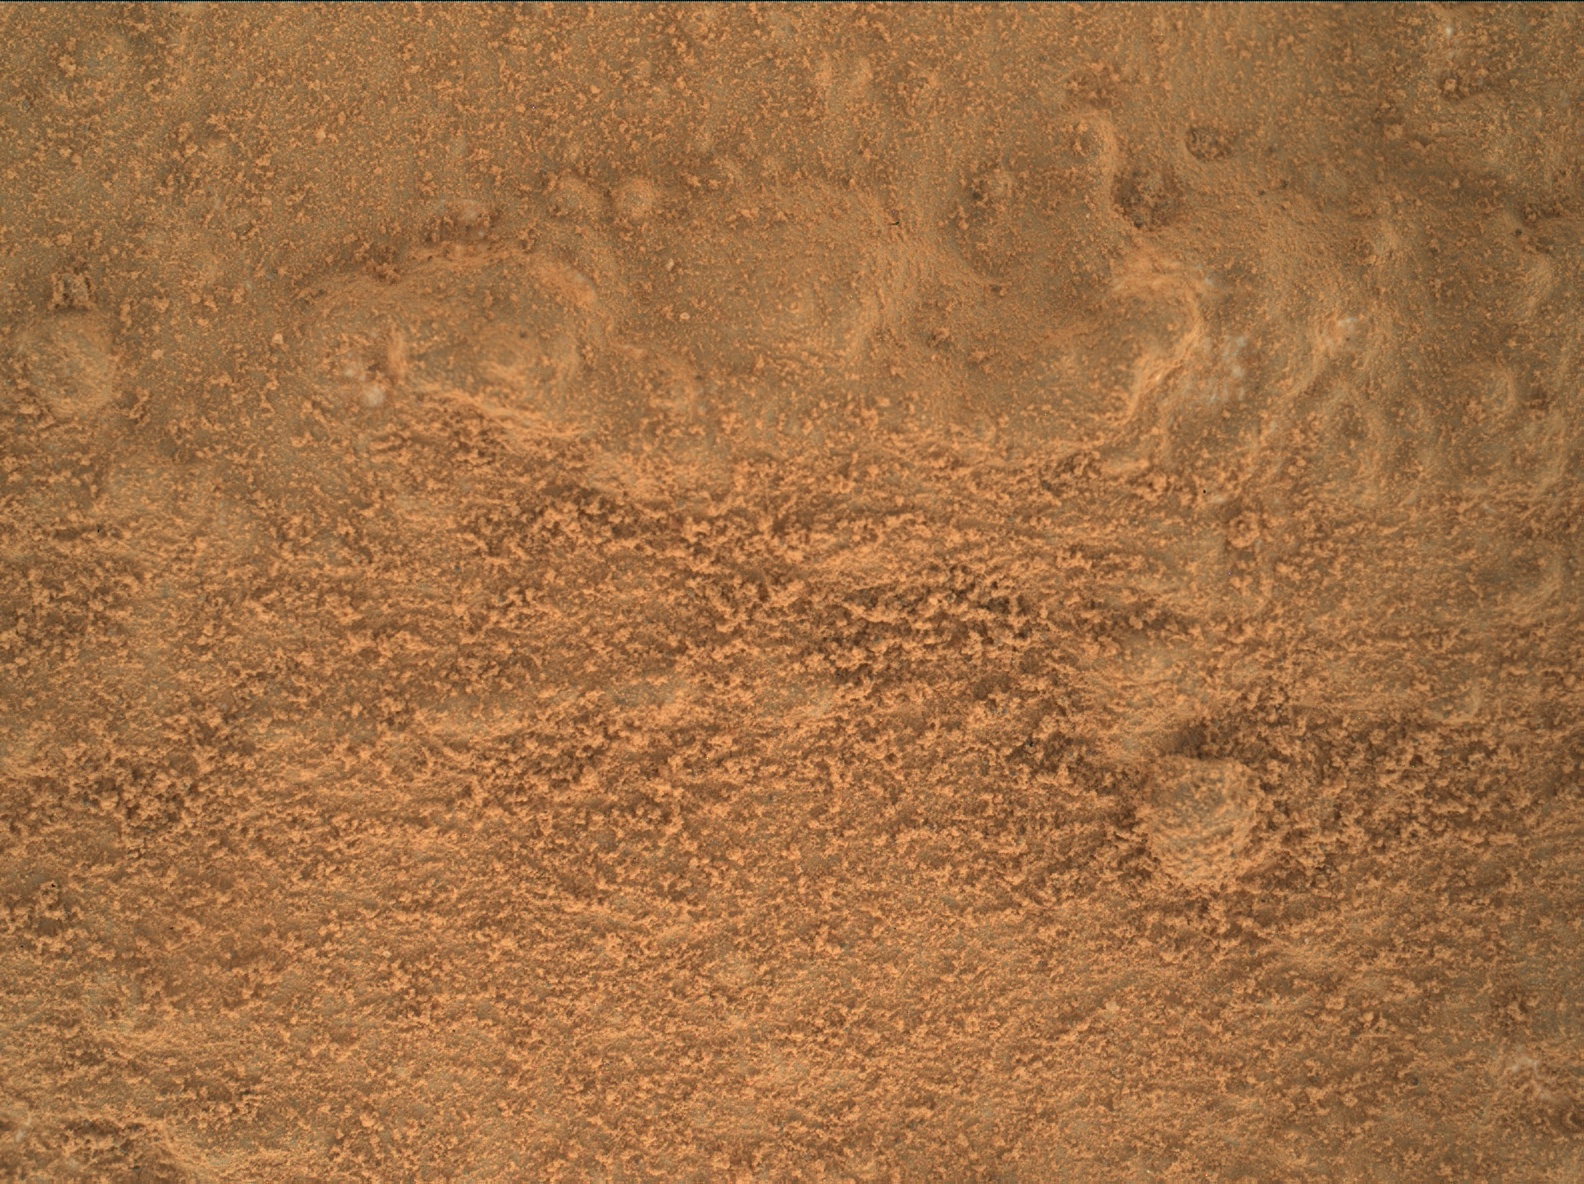 Nasa's Mars rover Curiosity acquired this image using its Mars Hand Lens Imager (MAHLI) on Sol 168